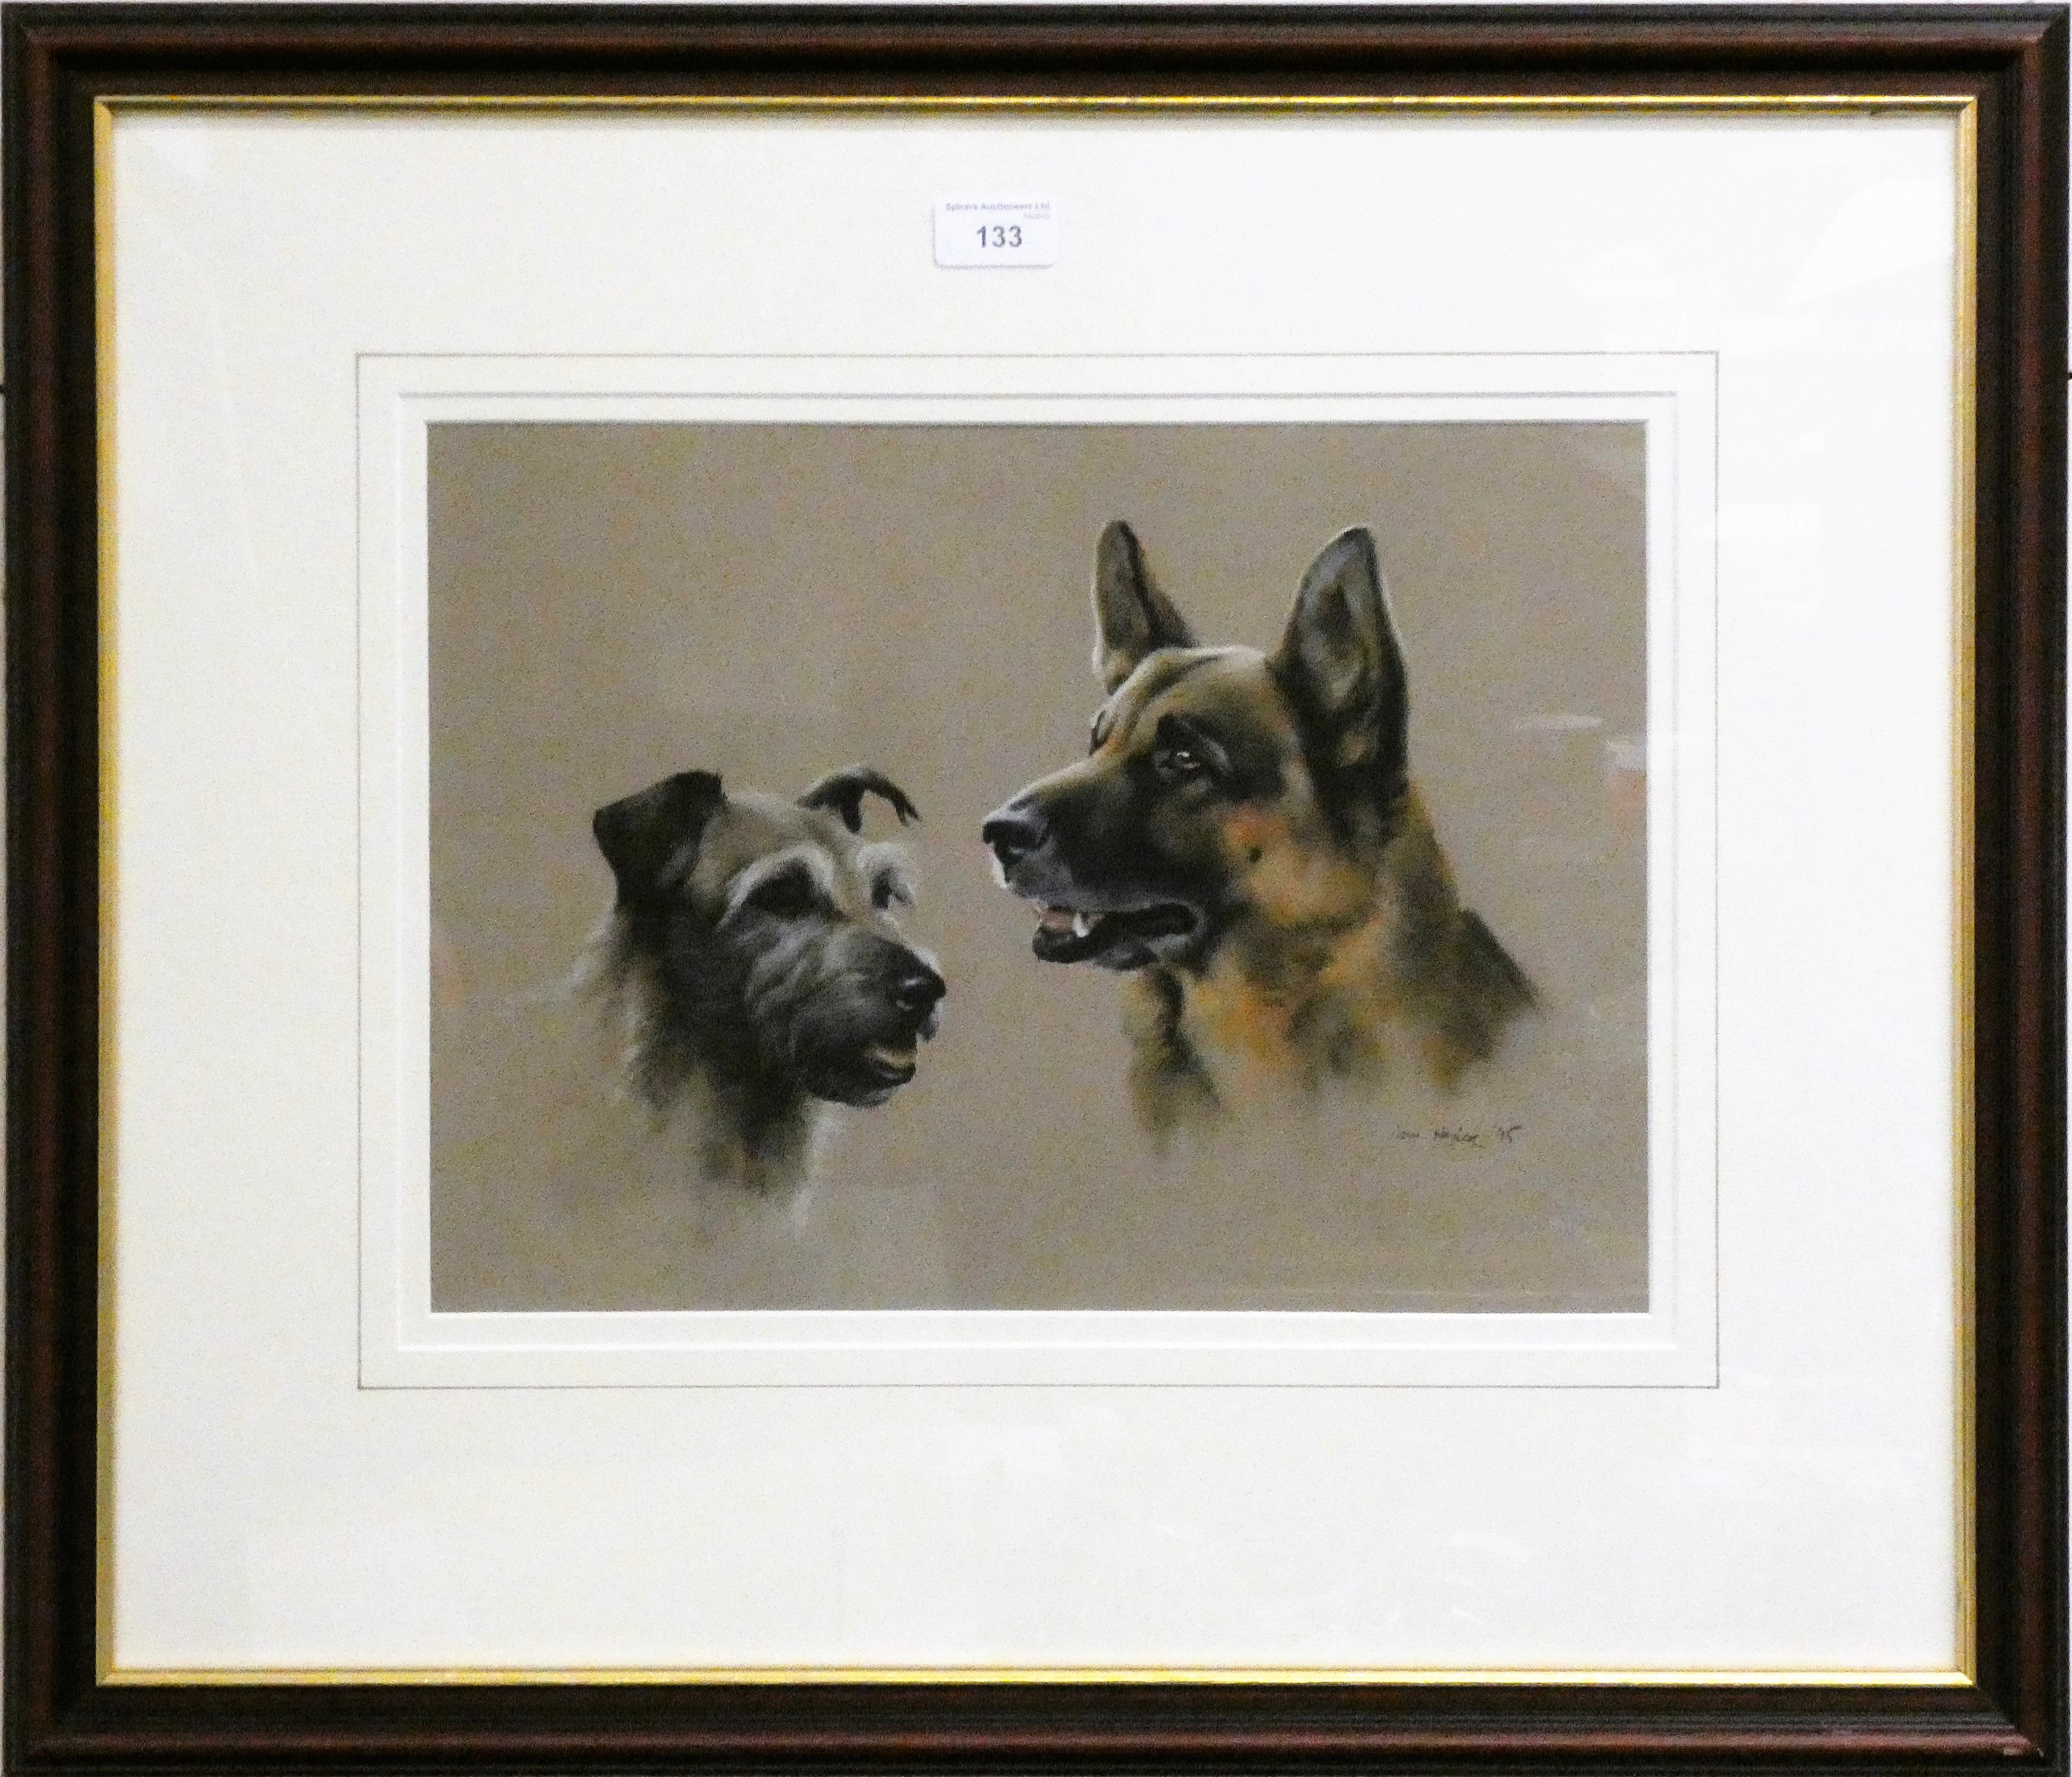 John Naylor pastel ' Two Dogs', signed and dated 95, mahogany frame, 64 x 56 cm. - Image 2 of 2